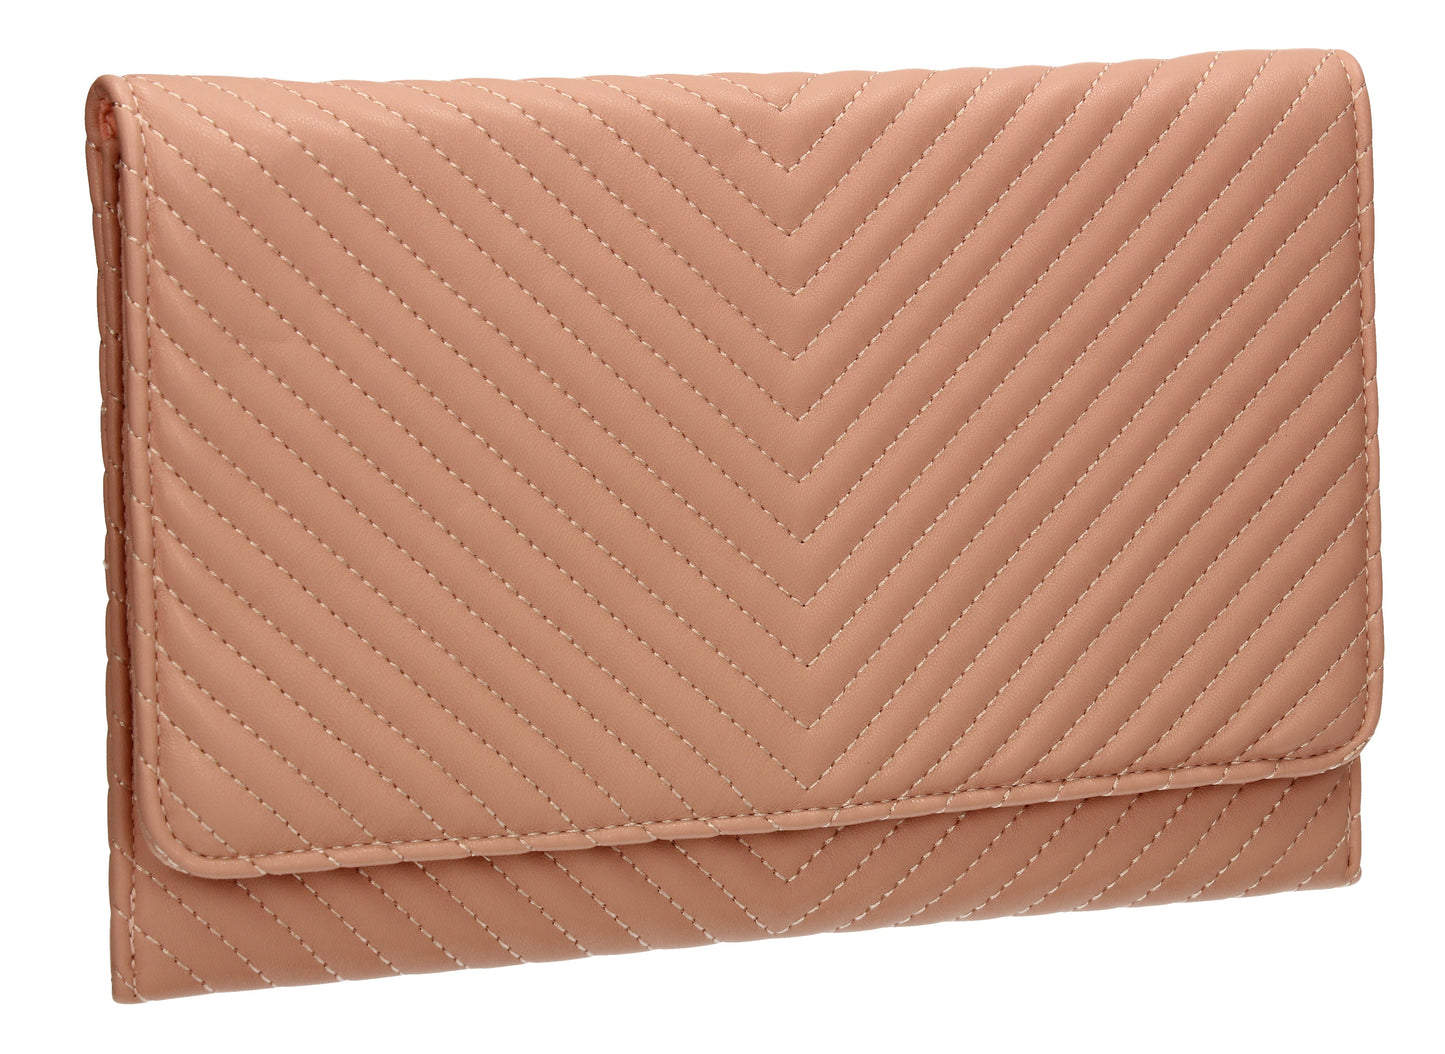 SWANKYSWANS Emmy Flapover Clutch Bag Pink Beige Cute Cheap Clutch Bag For Weddings School and Work